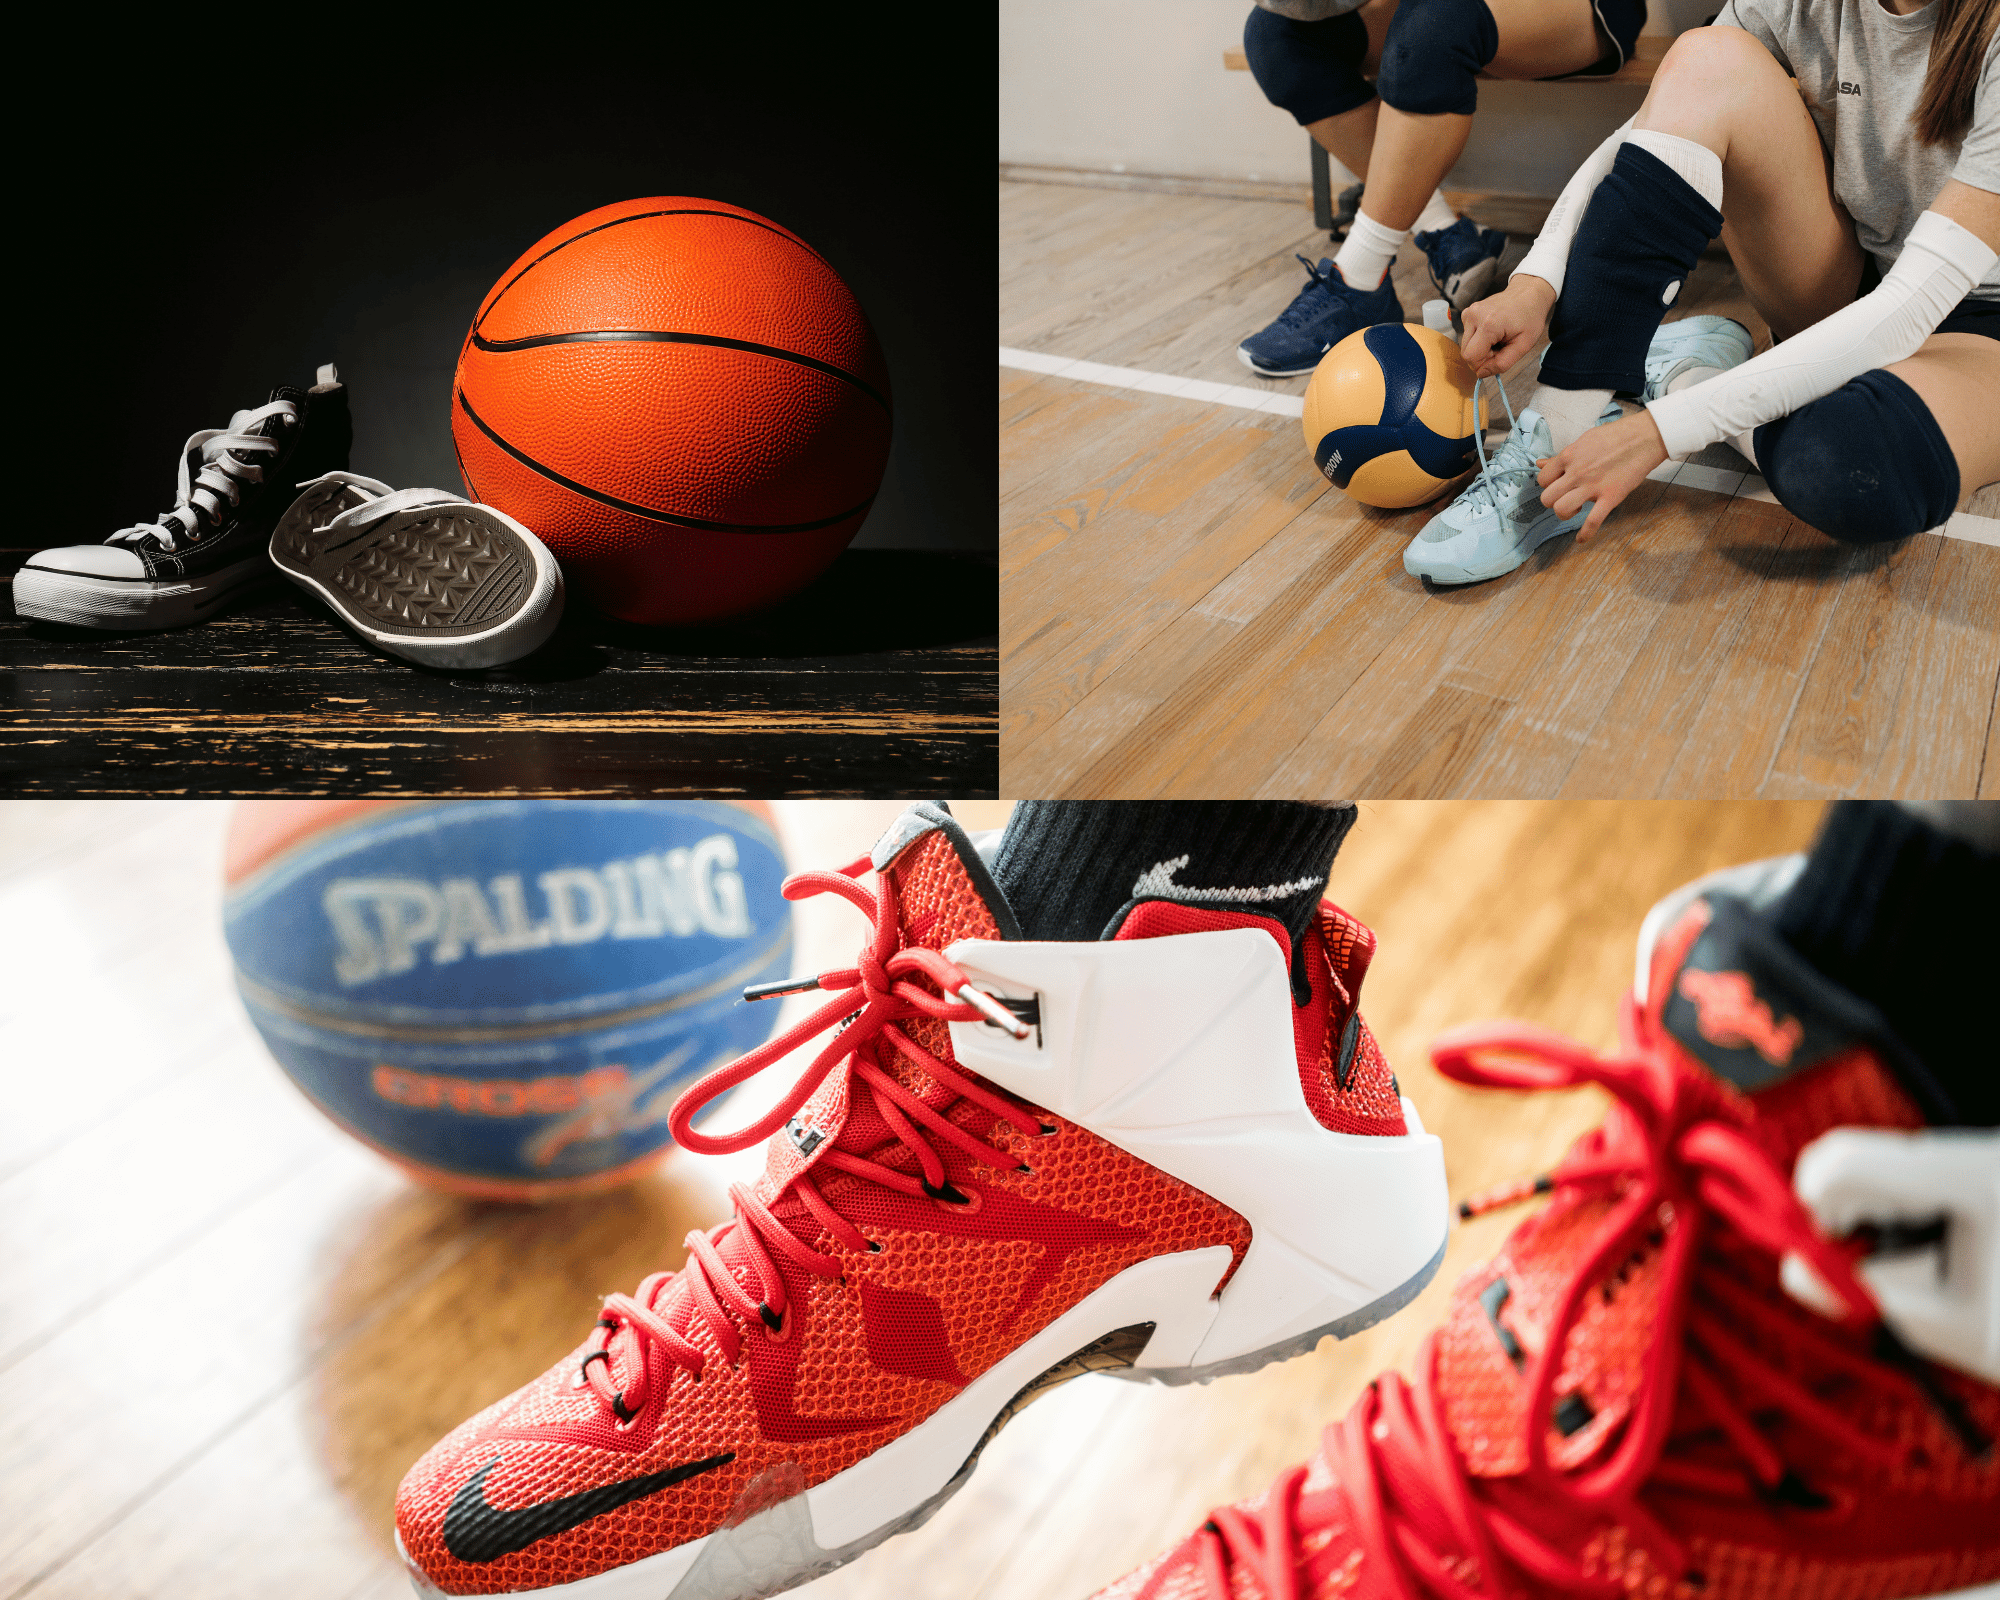 The Ultimate Guide to the Best Brands of Basketball Shoes